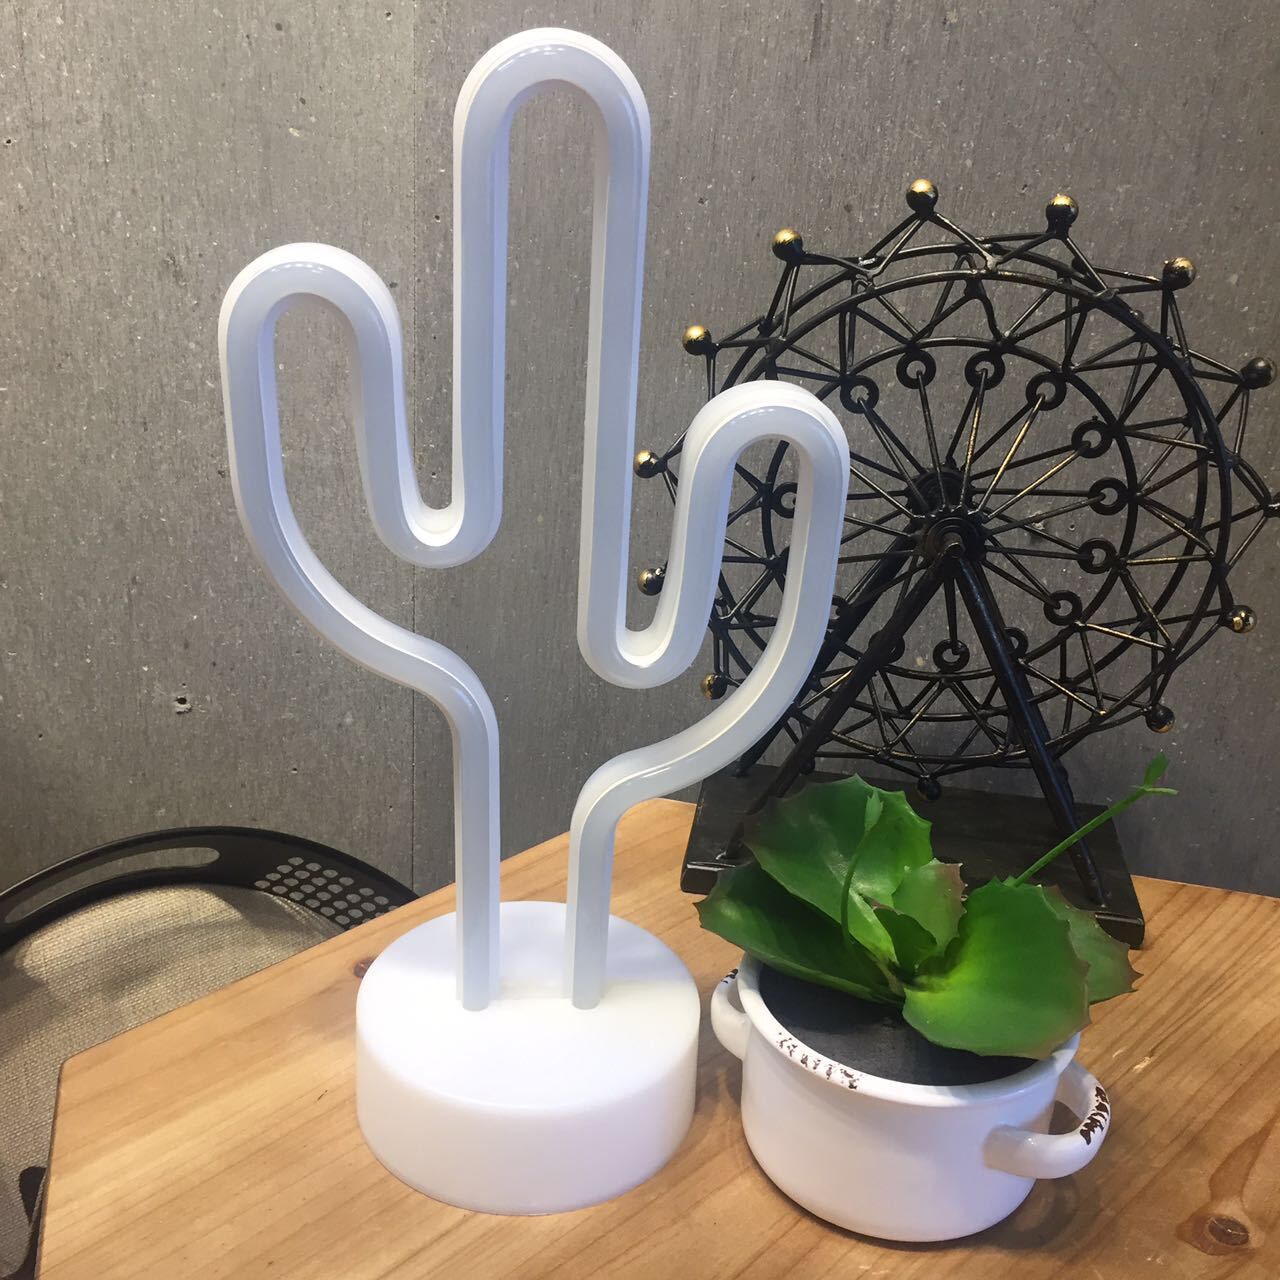 Cactus Neon Signs | Cactus Neon Signs LED Neon Light Sign with Holder Base for Party Supplies Neon Table Lamp